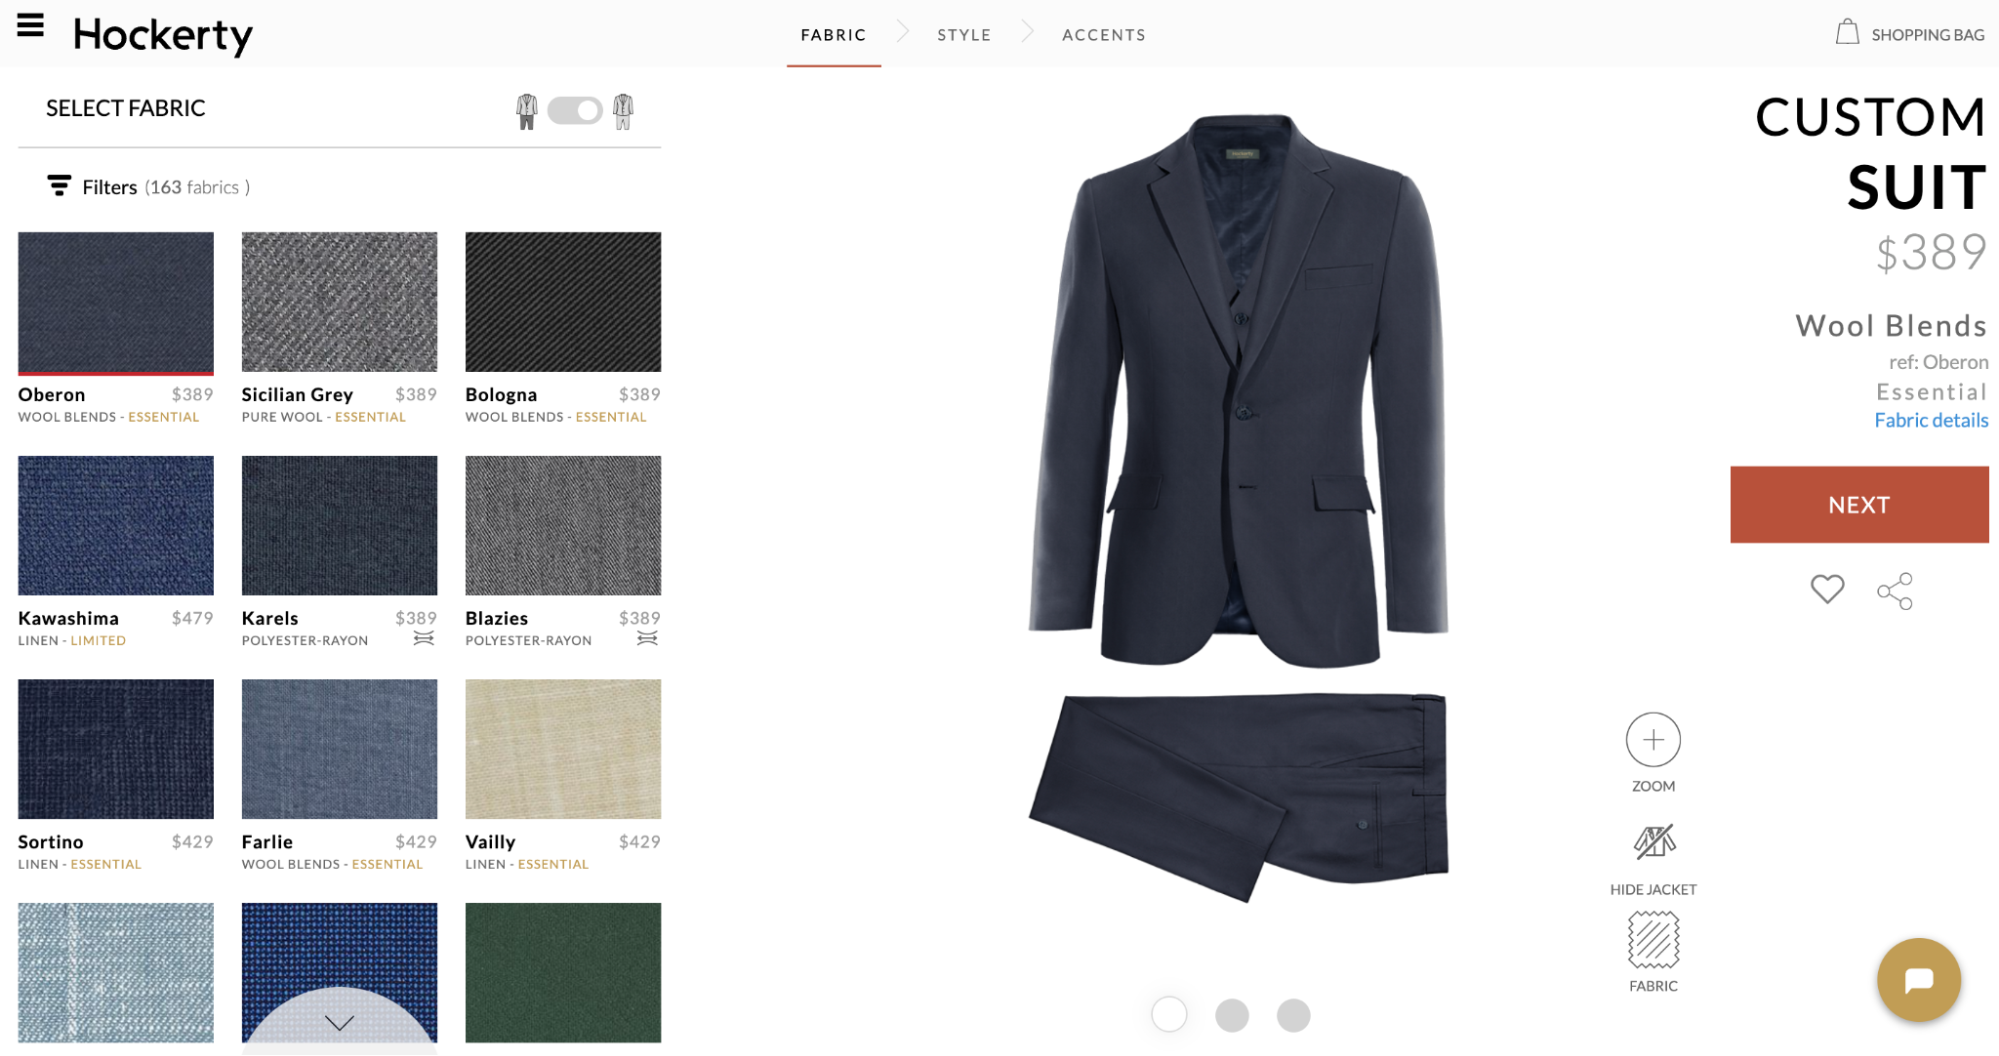 Hockerty suit customization feature direct-to-consumer brands